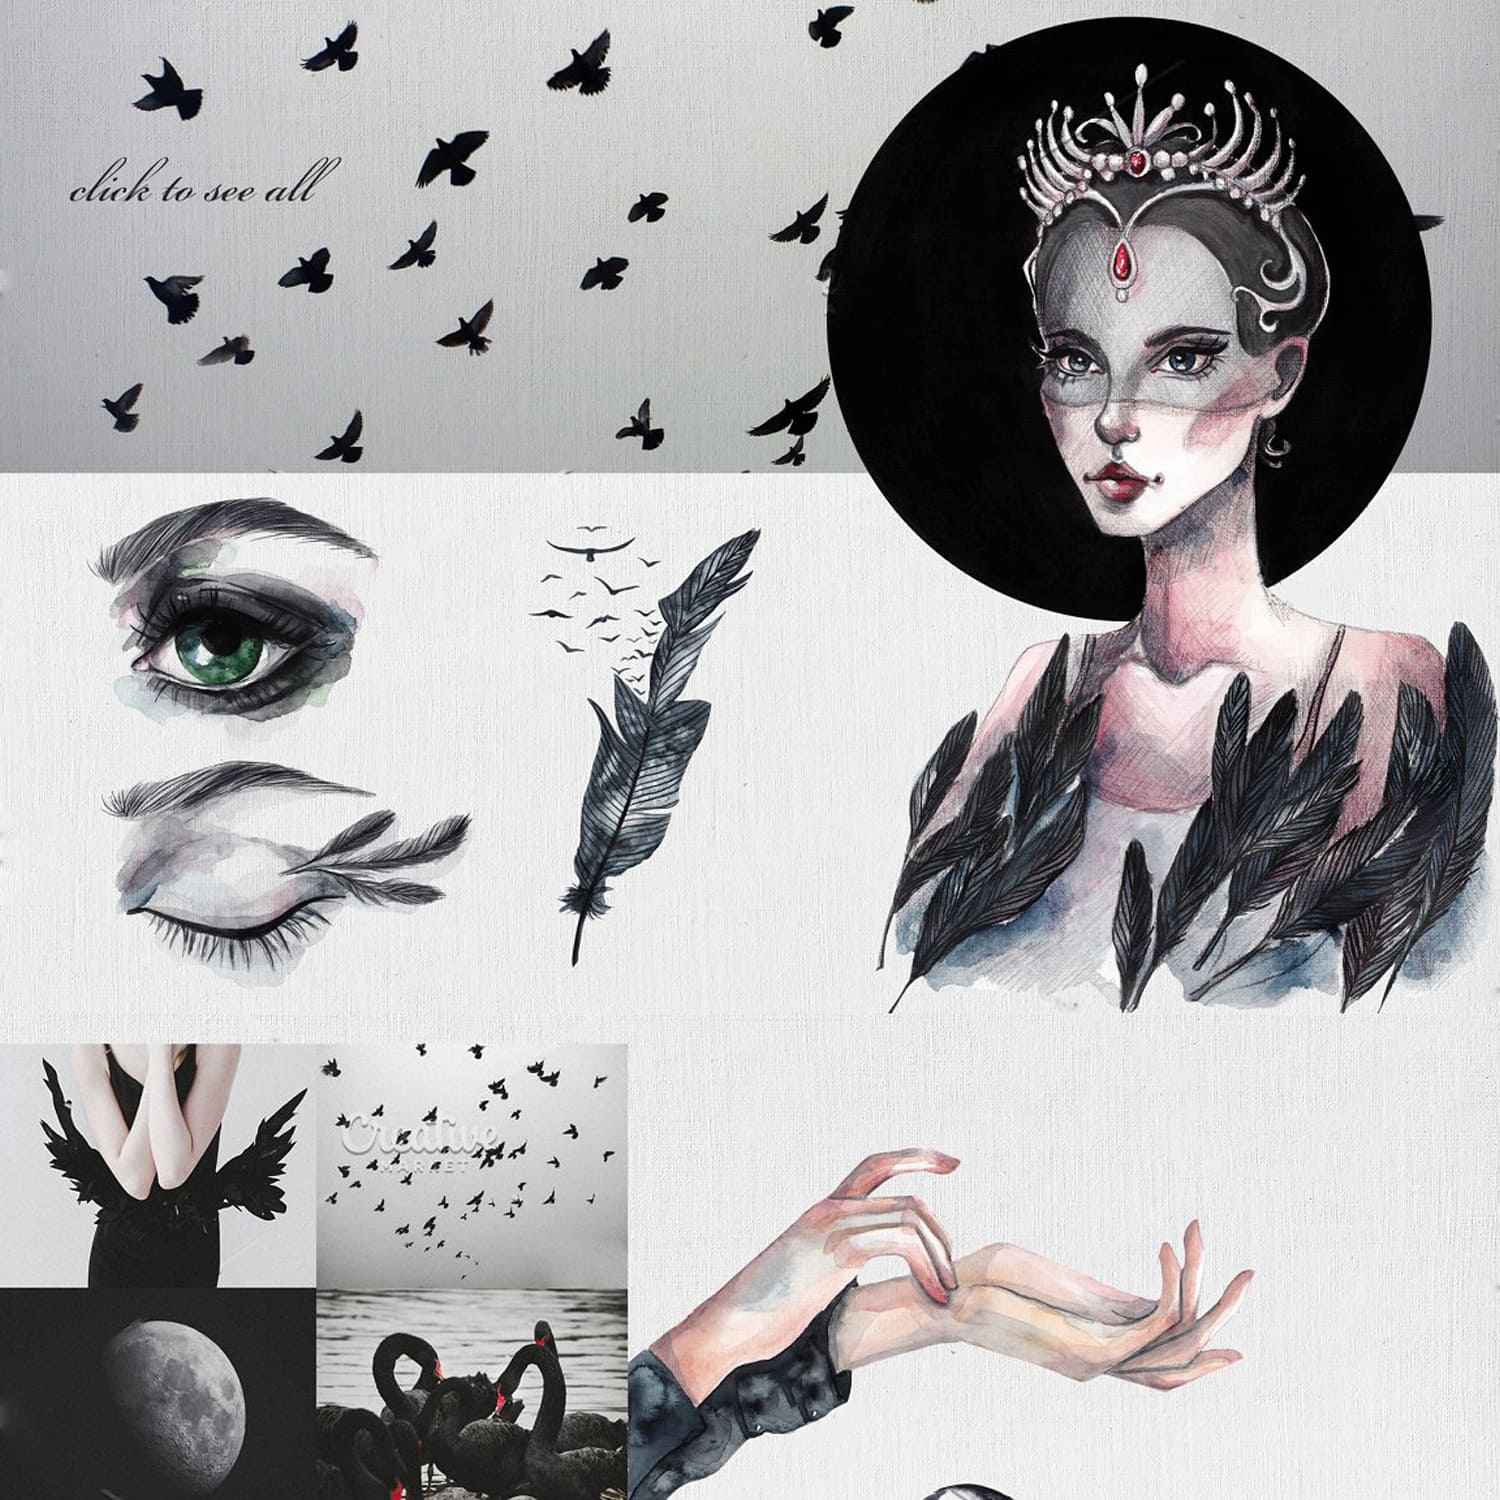 Odile. Black Swan collection cover.